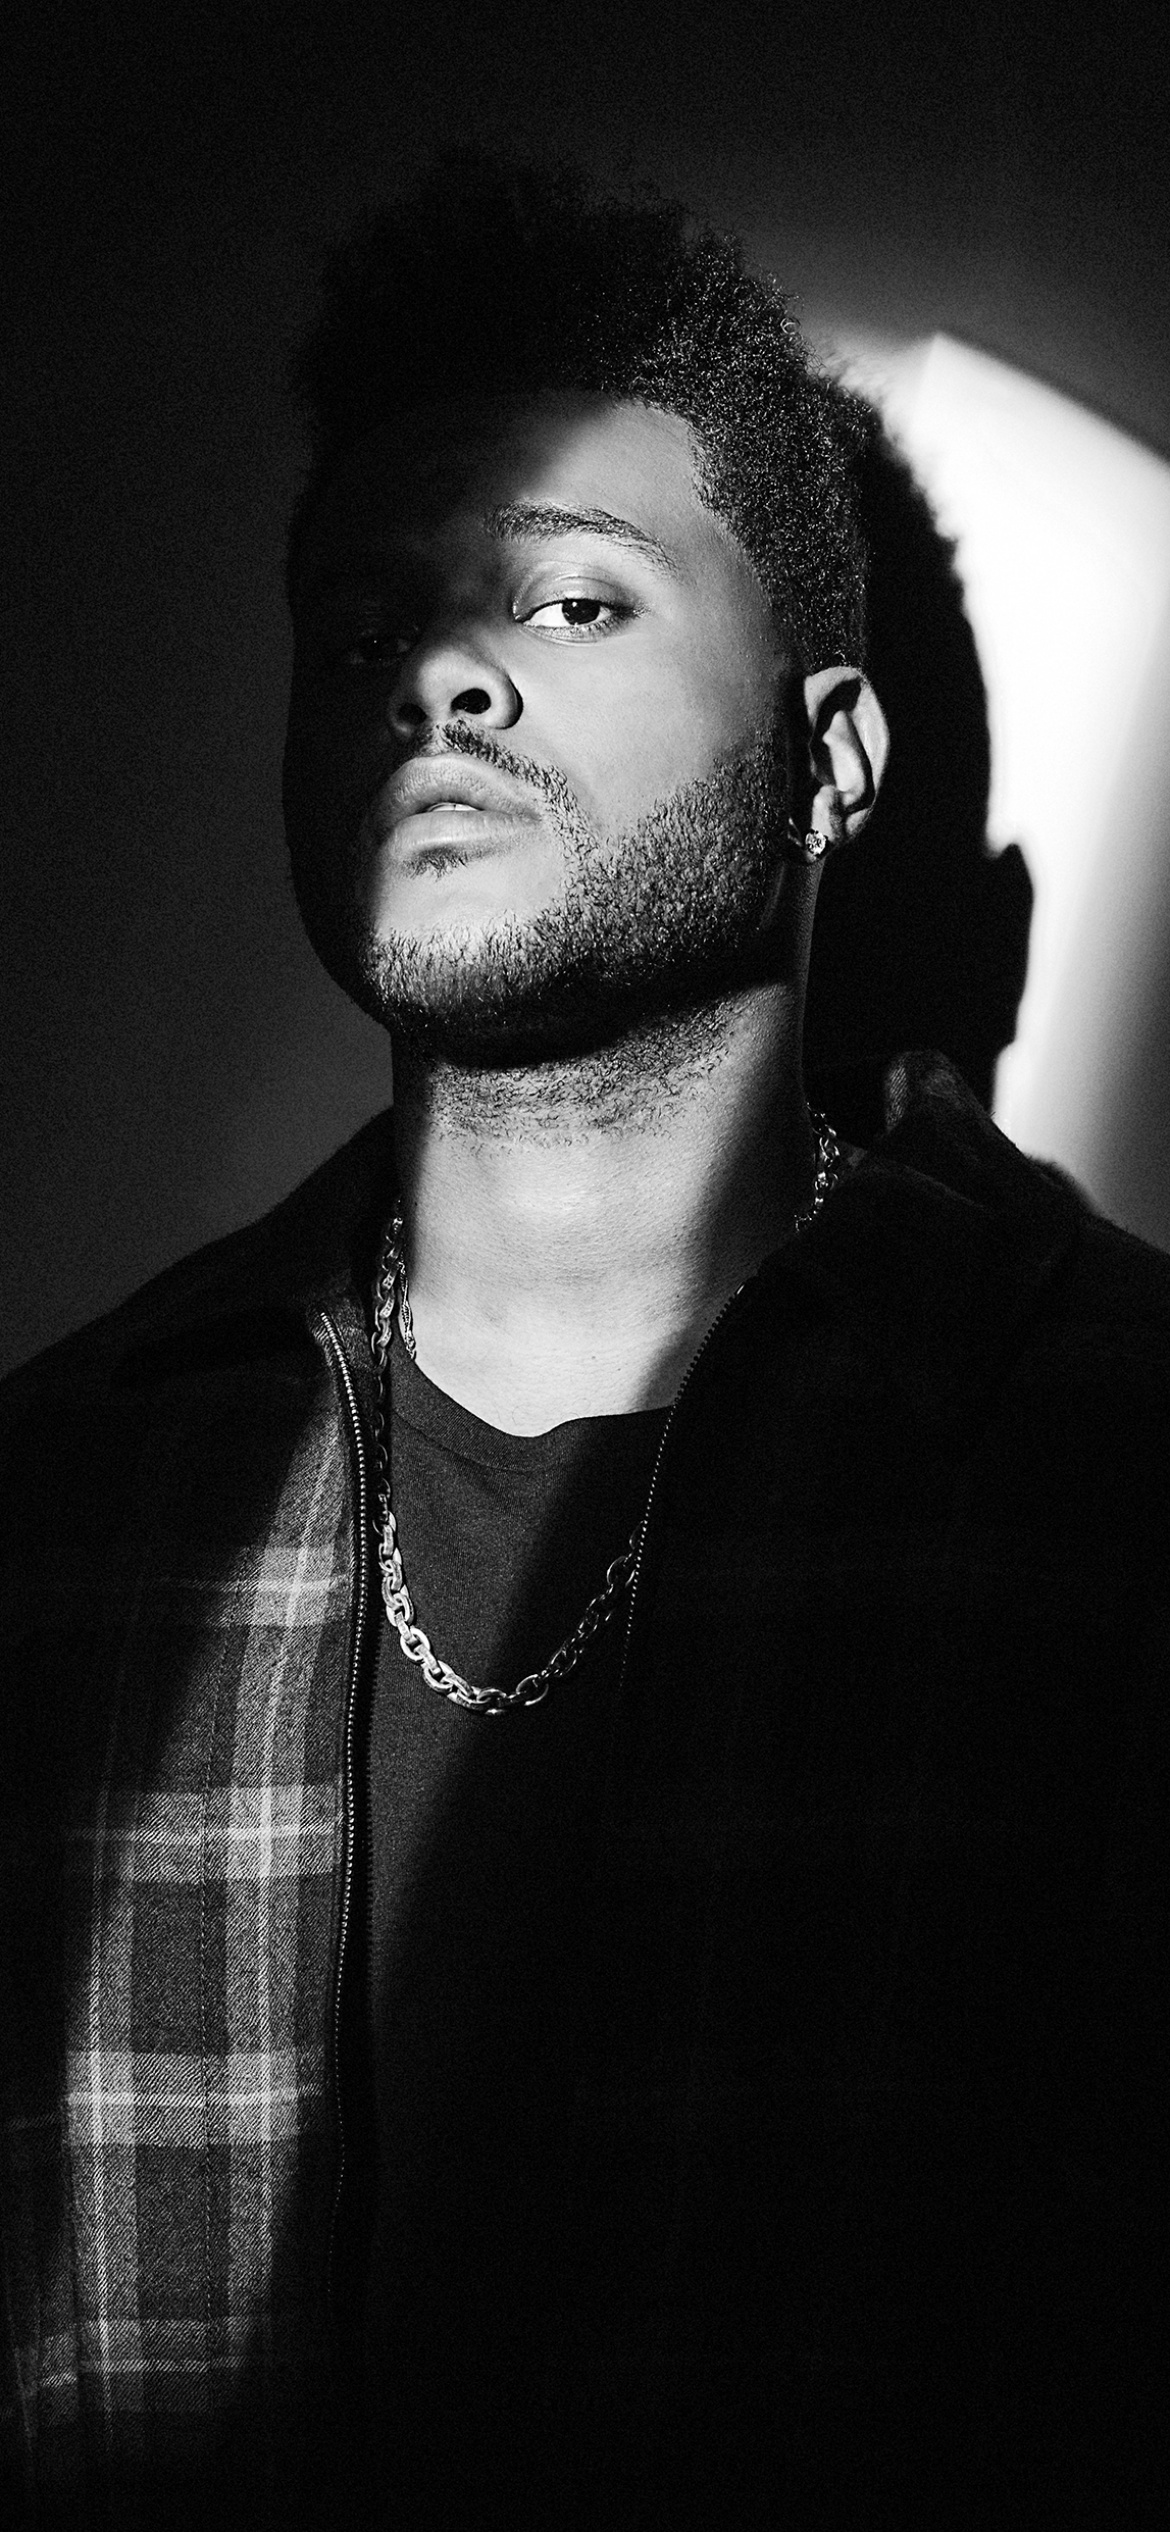 the weeknd background for iphone